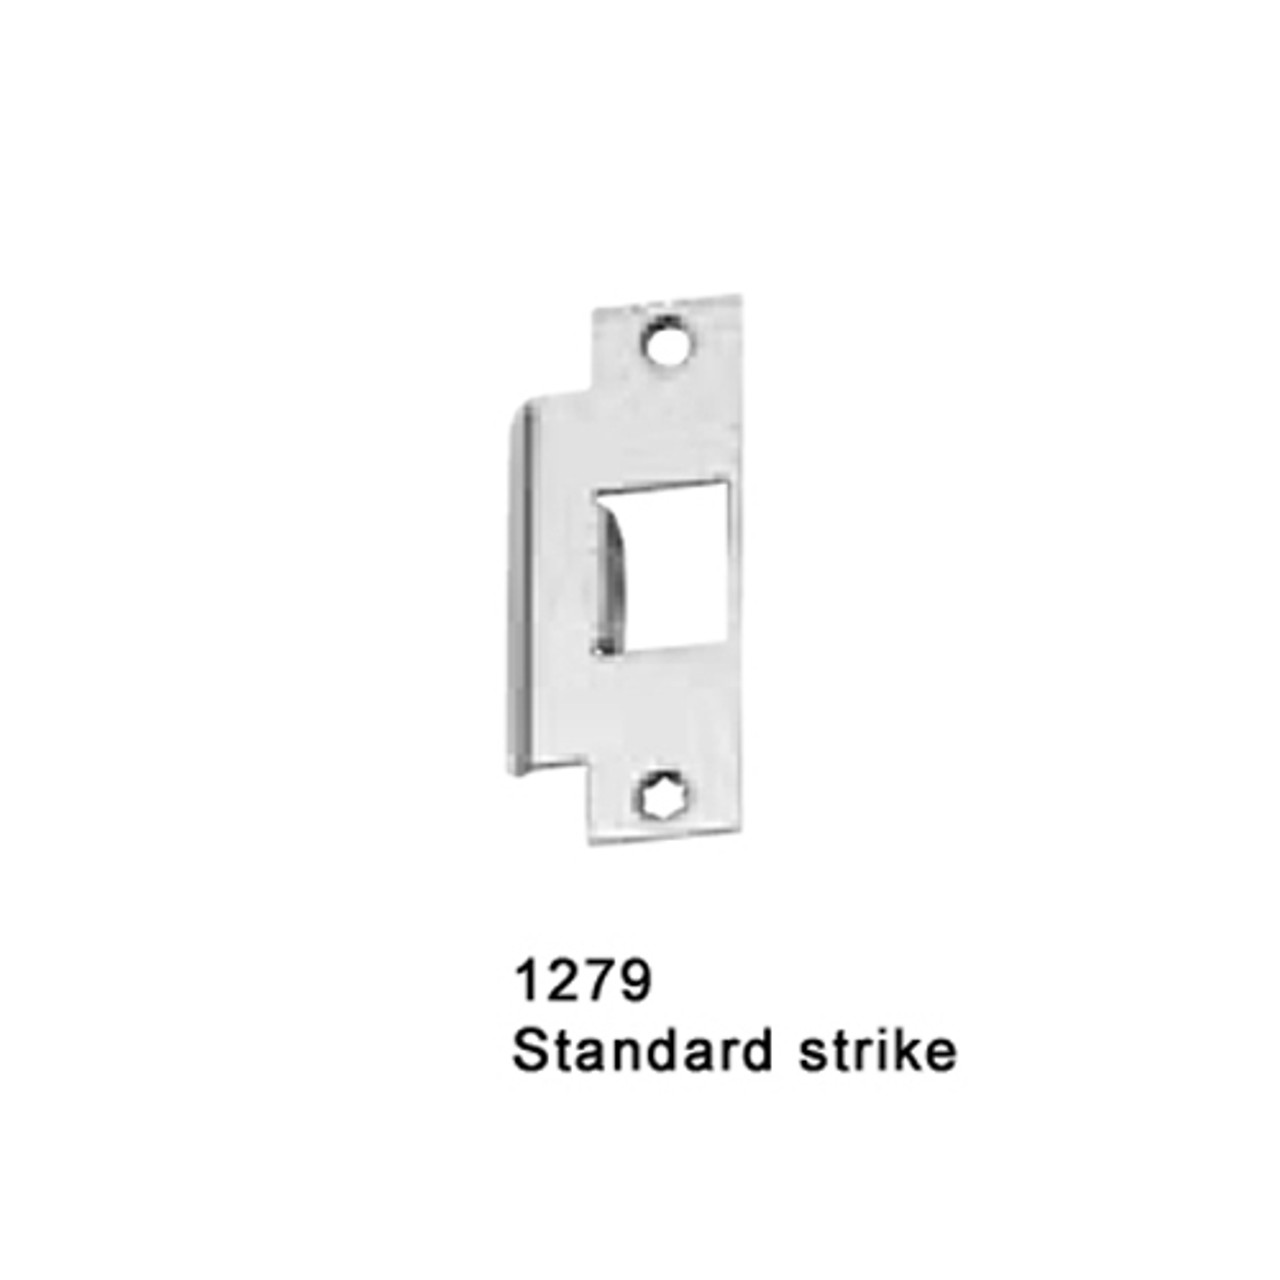 CD25-M-TP-BE-US26-4-RHR Falcon 25 Series Mortise Lock Devices 512TP-BE Thumbpiece Trim with Blank Escutcheon in Polished Chrome